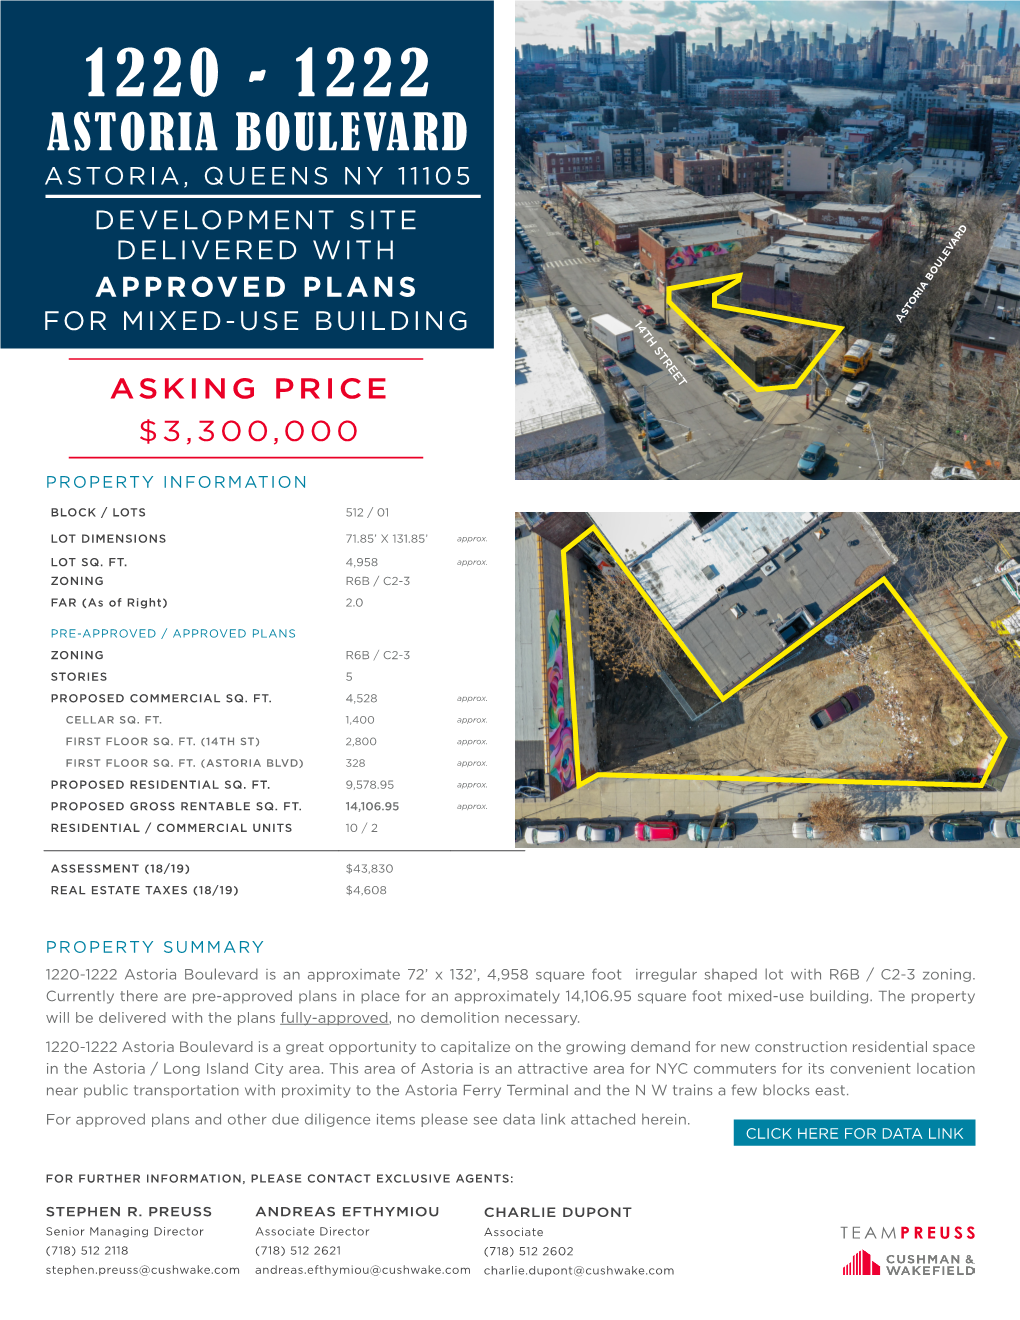 Astoria Boulevard Astoria, Queens Ny 11105 Development Site Delivered with Approved Plans